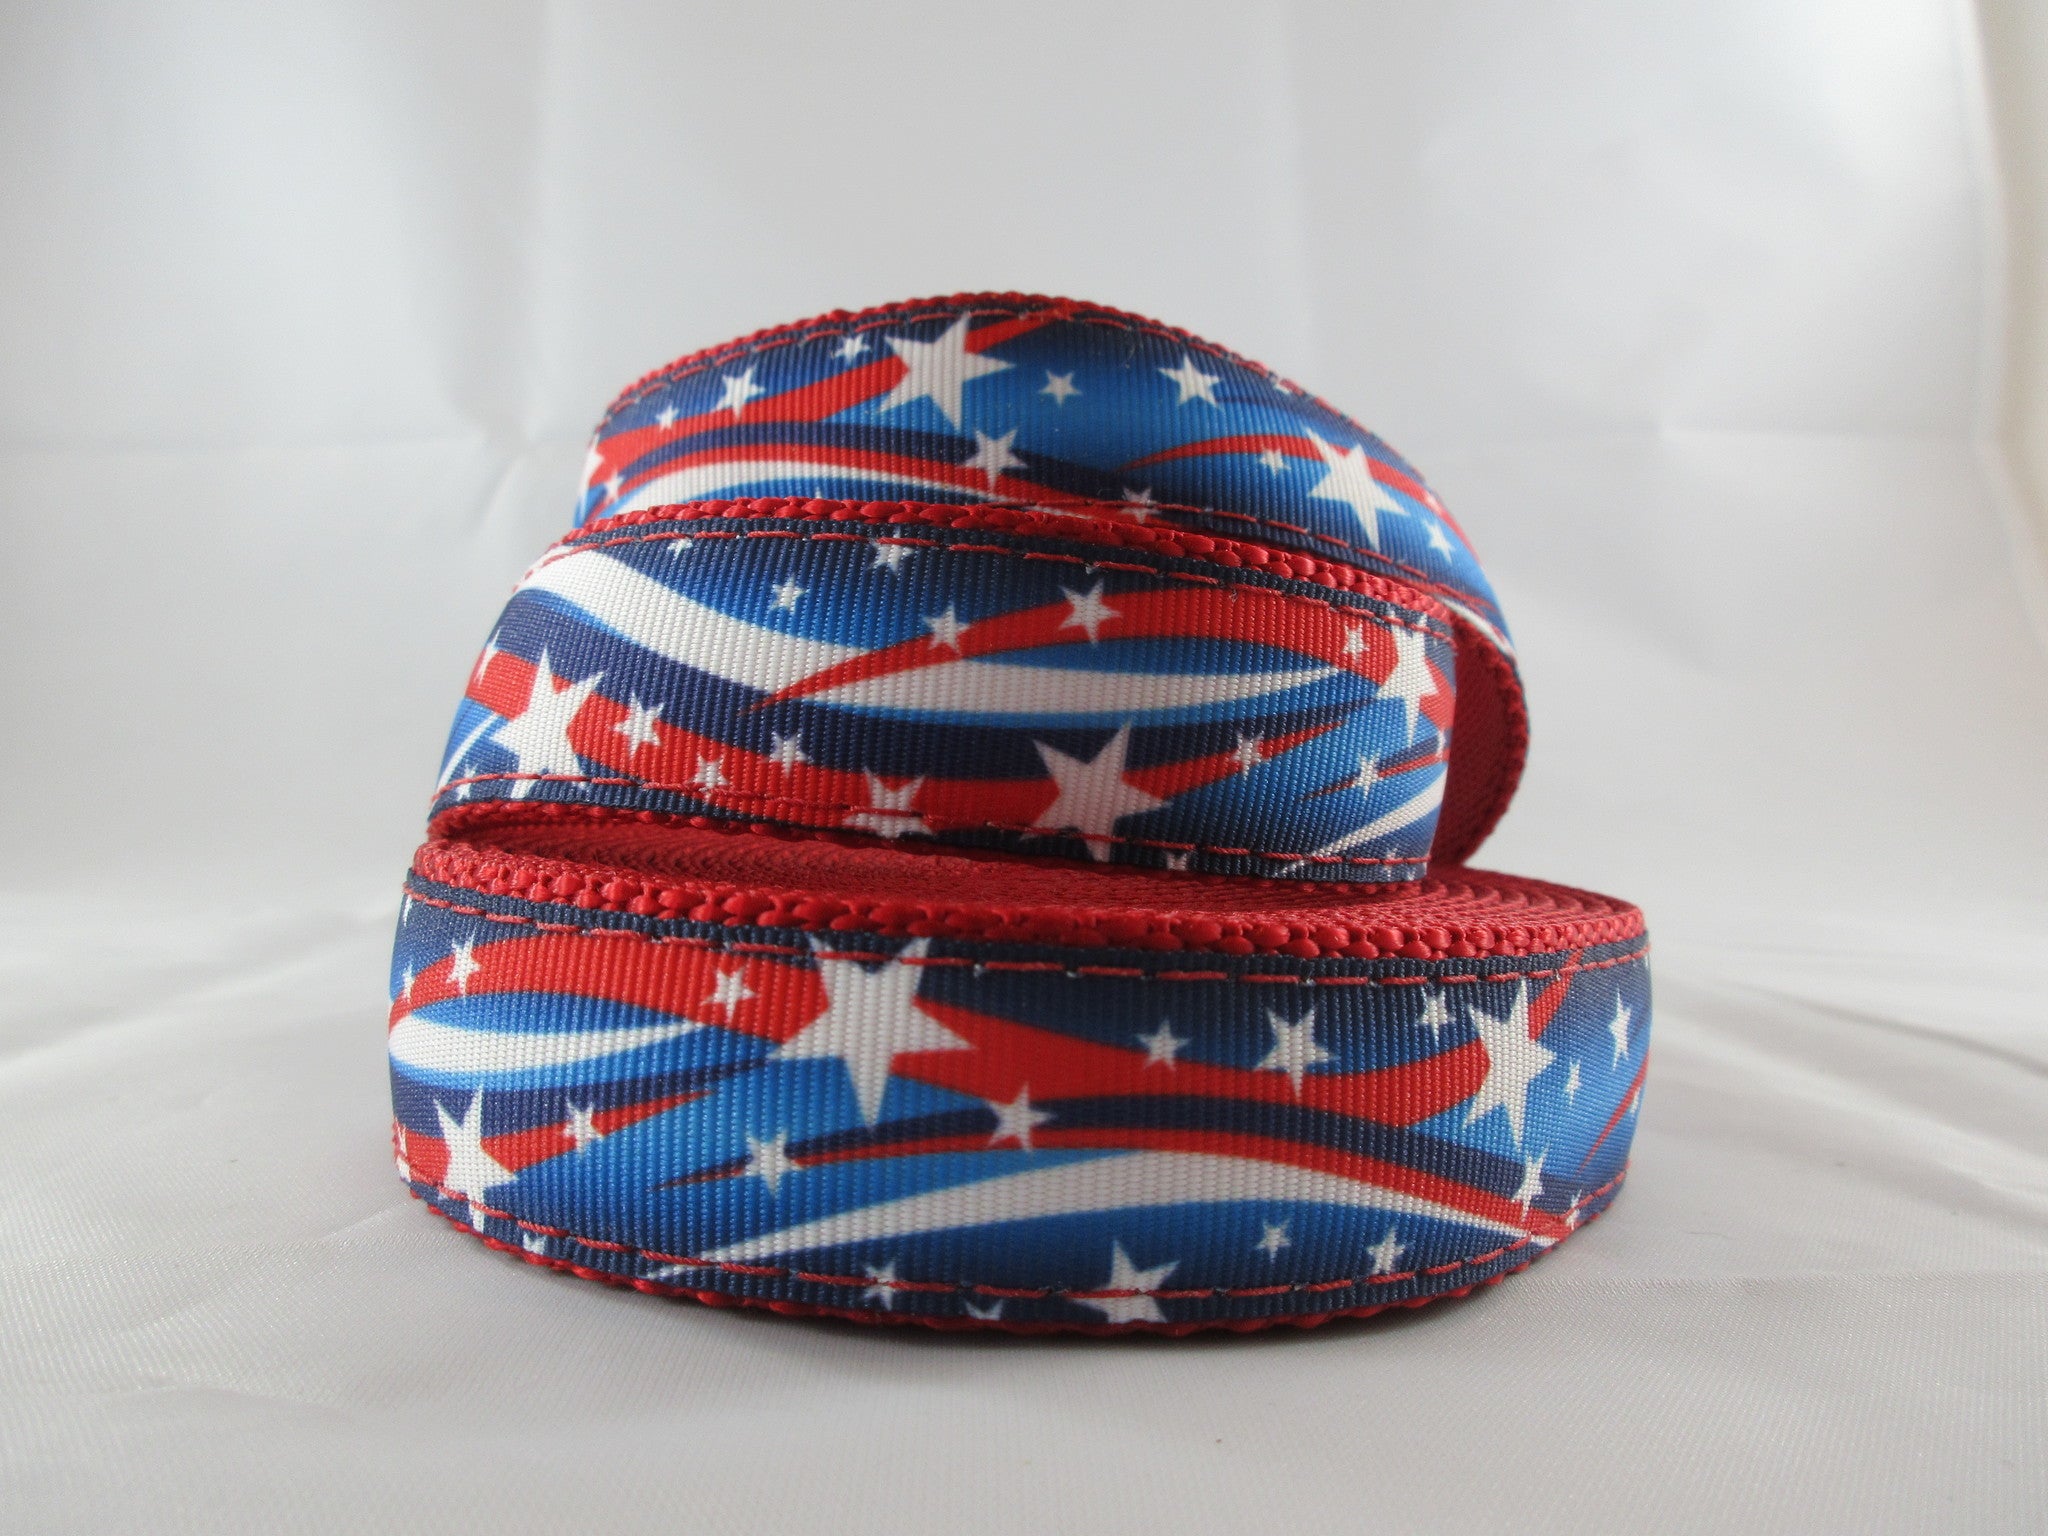 3/4" Star Spangled Pig Harness - Penny and Hoover's Pig Pen